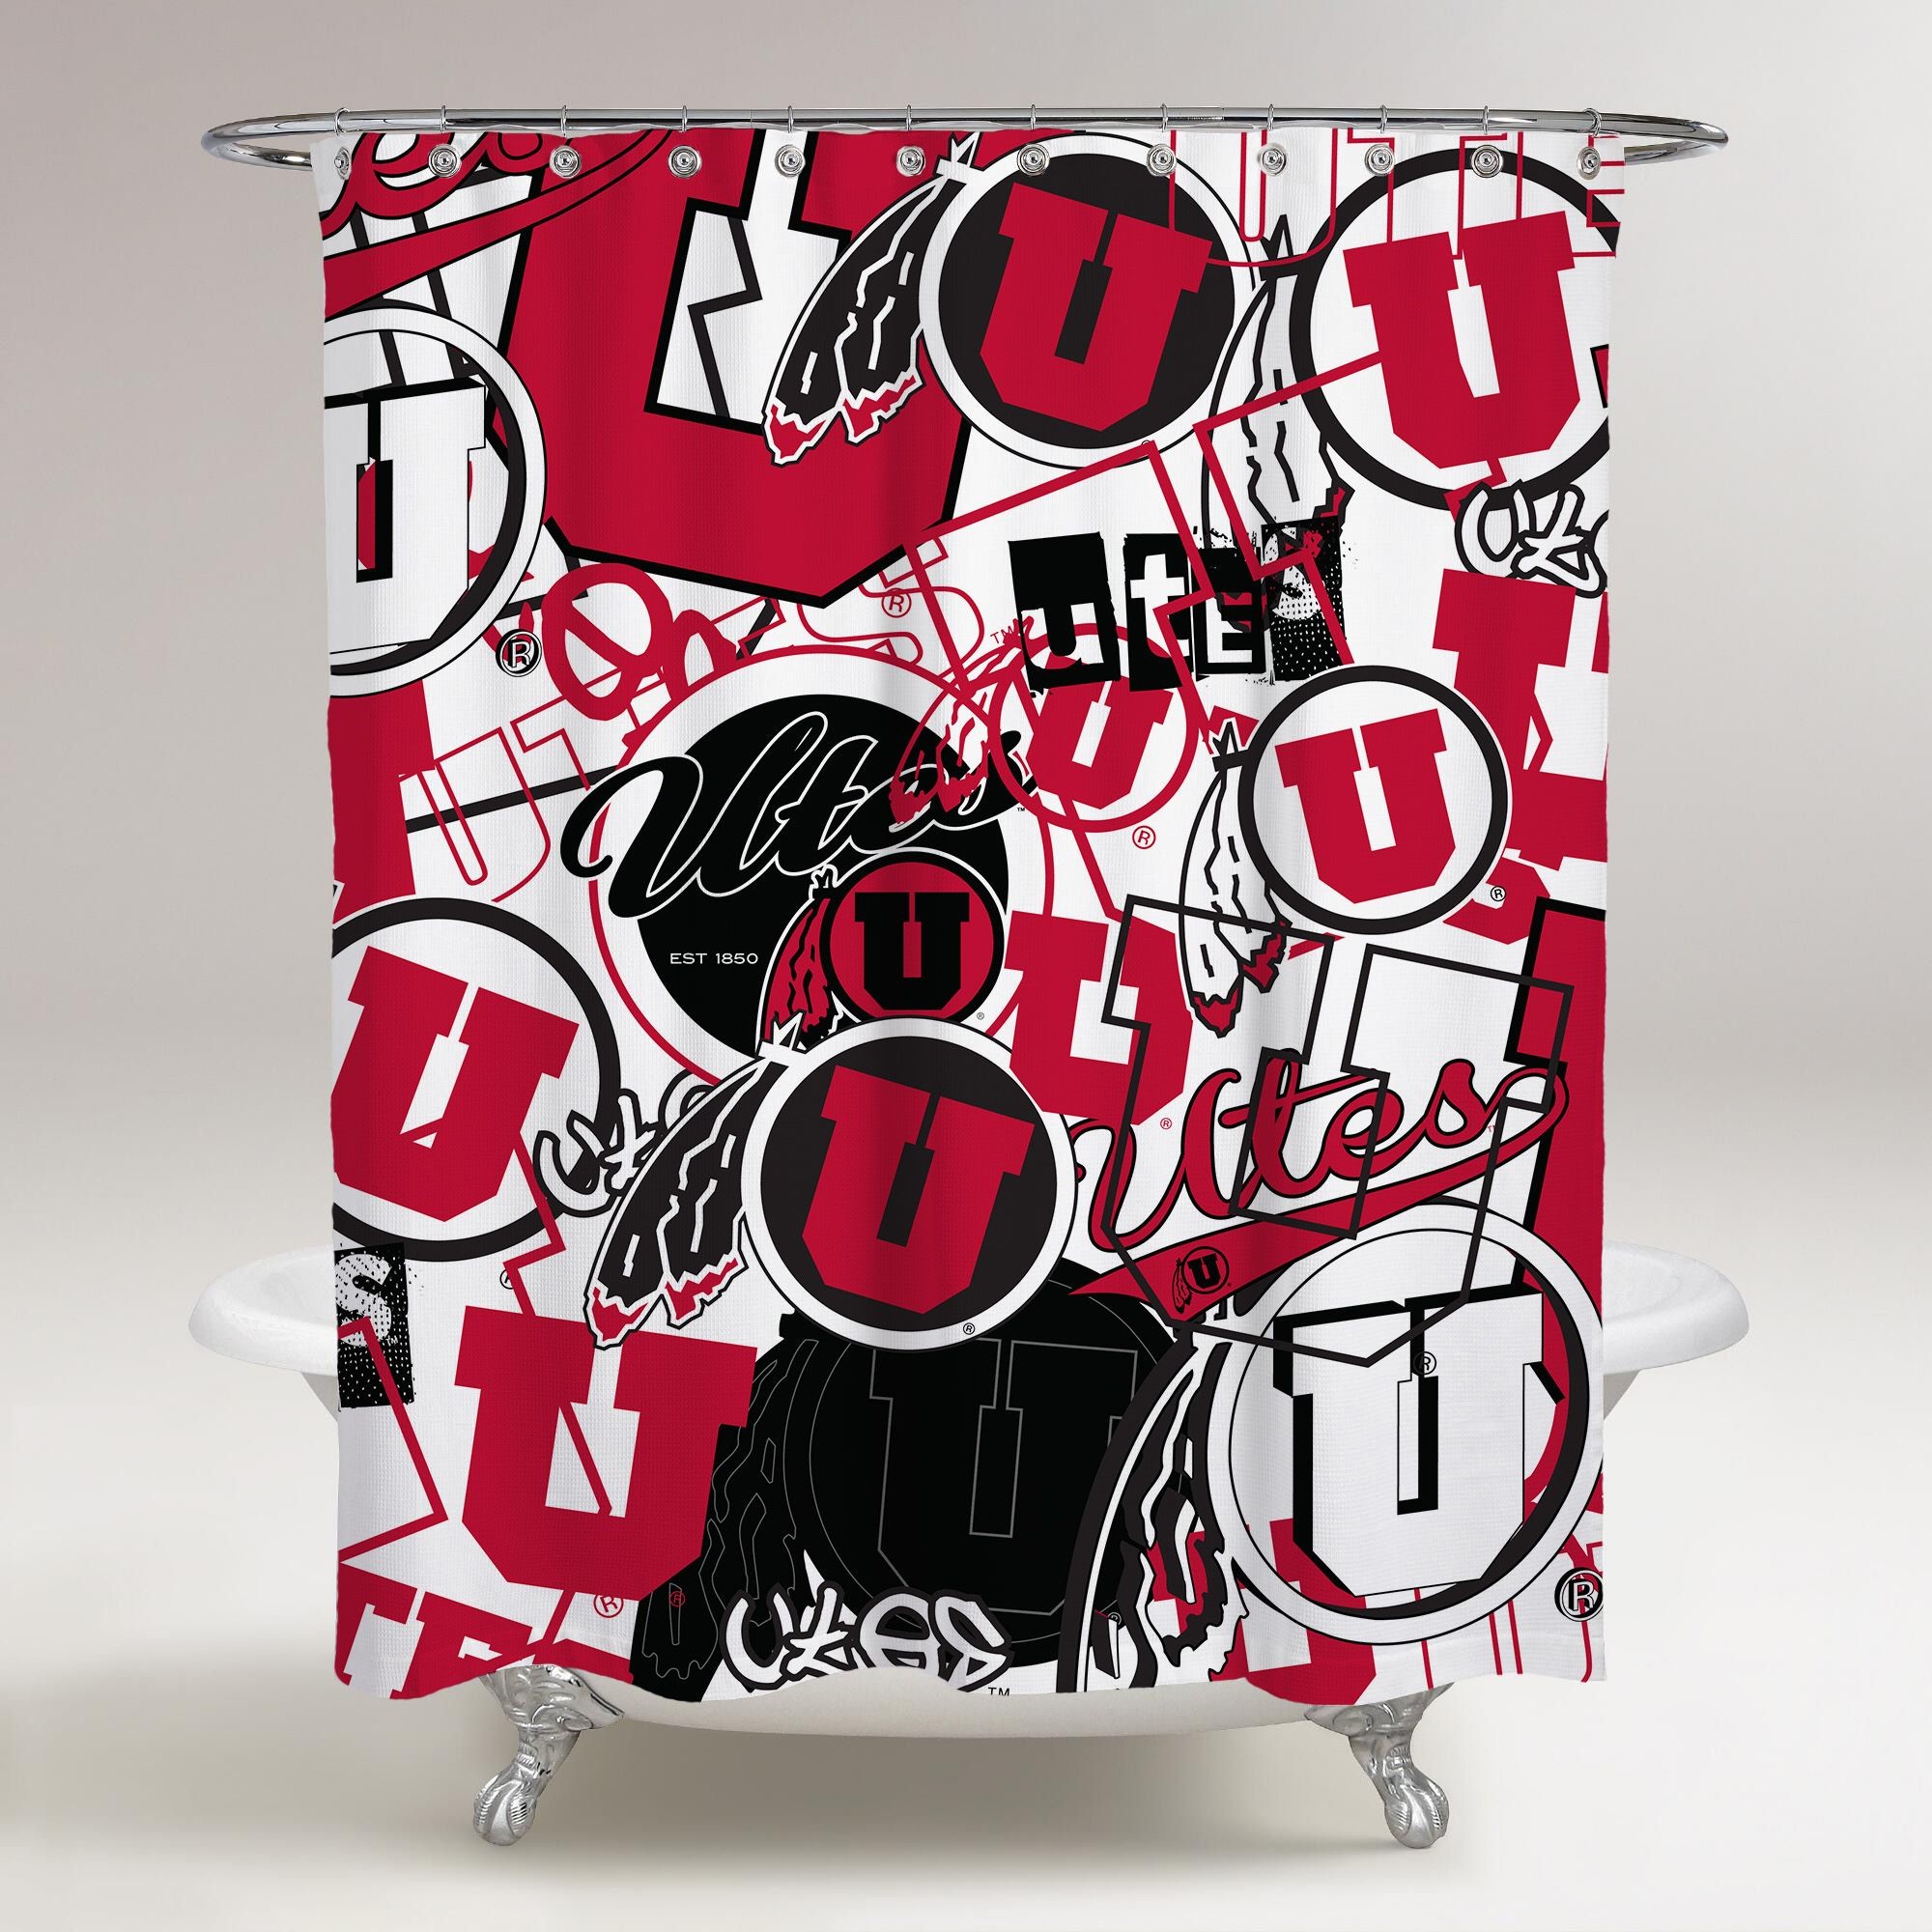 2000x2000 UTAH UTES LOGO UTES WALLPAPER CURTAIN COLLAGE FOOTBALL NCAA UNIQUE SHOWER  CURTAIN Price: 50.00 & FREE Shipping #posters